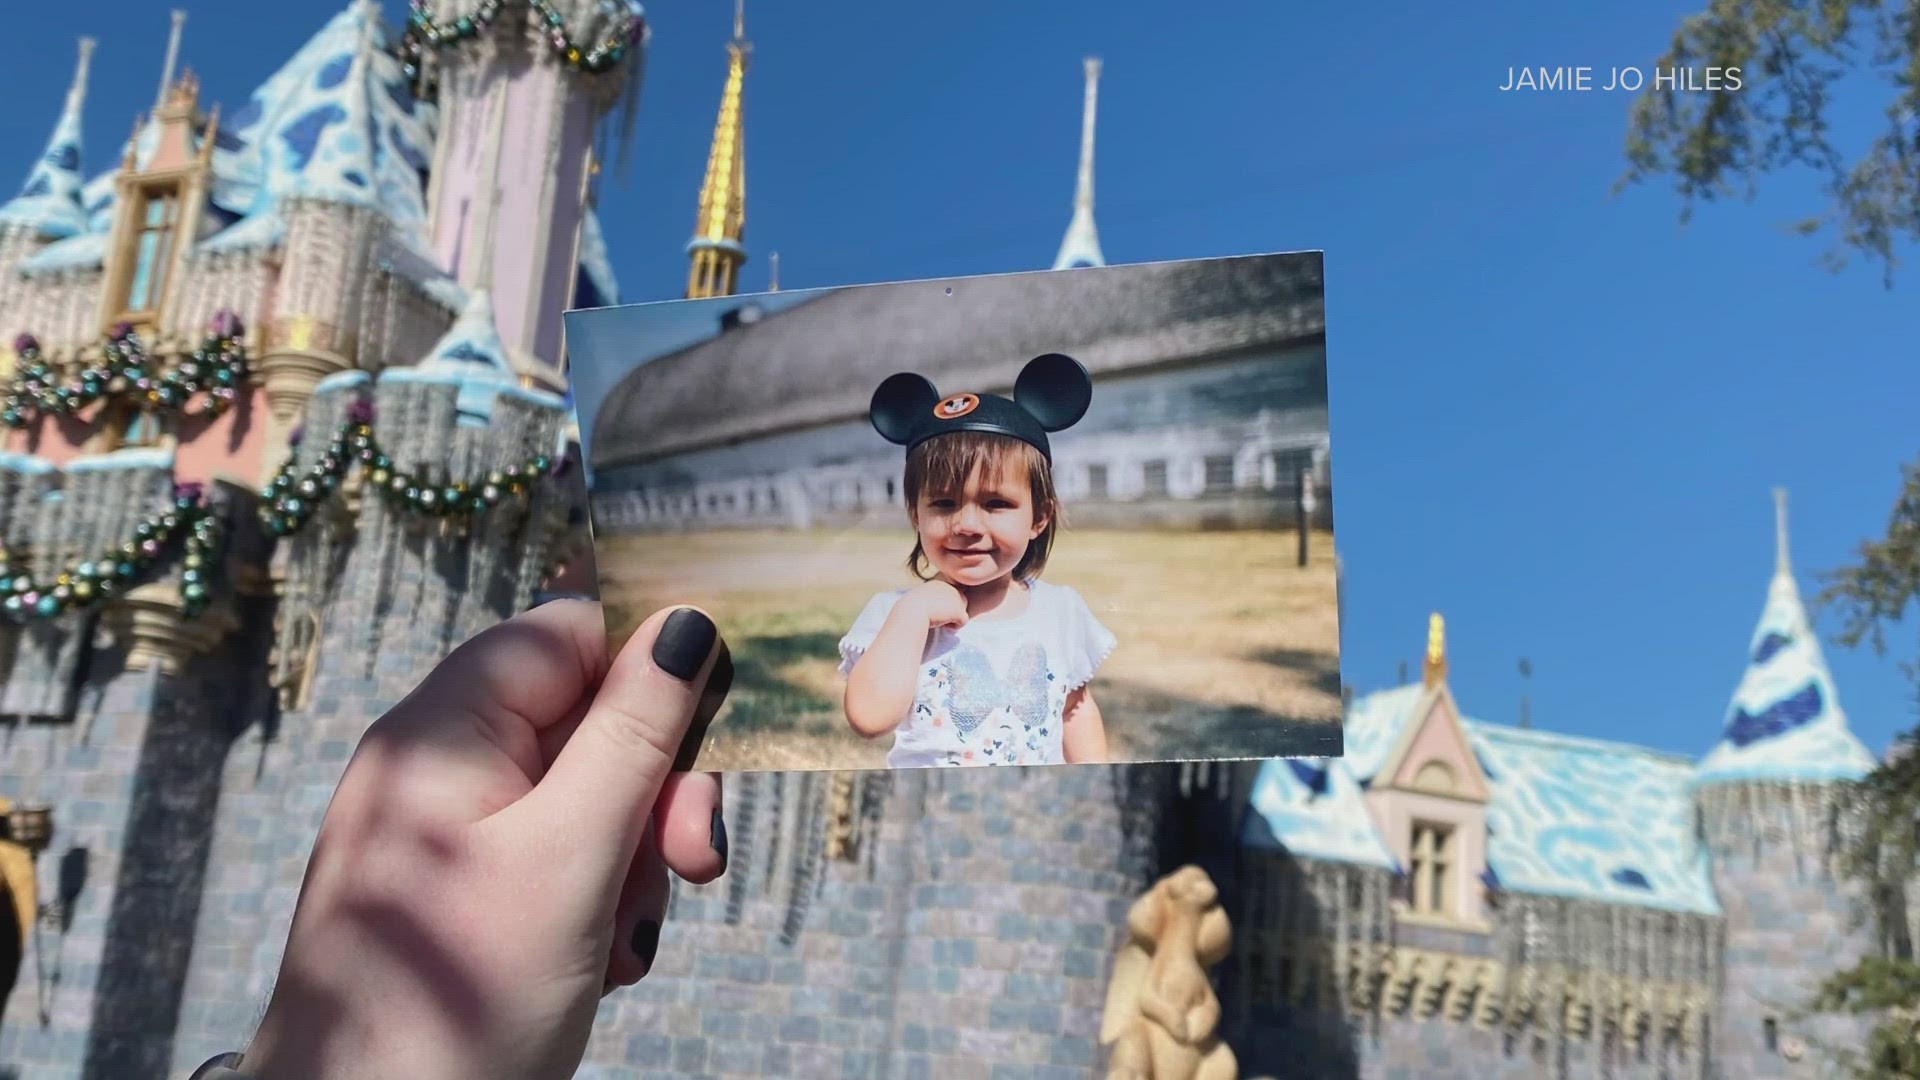 Two years after Oakley Carlson was declared missing, her former foster parents honored her at Disneyland.